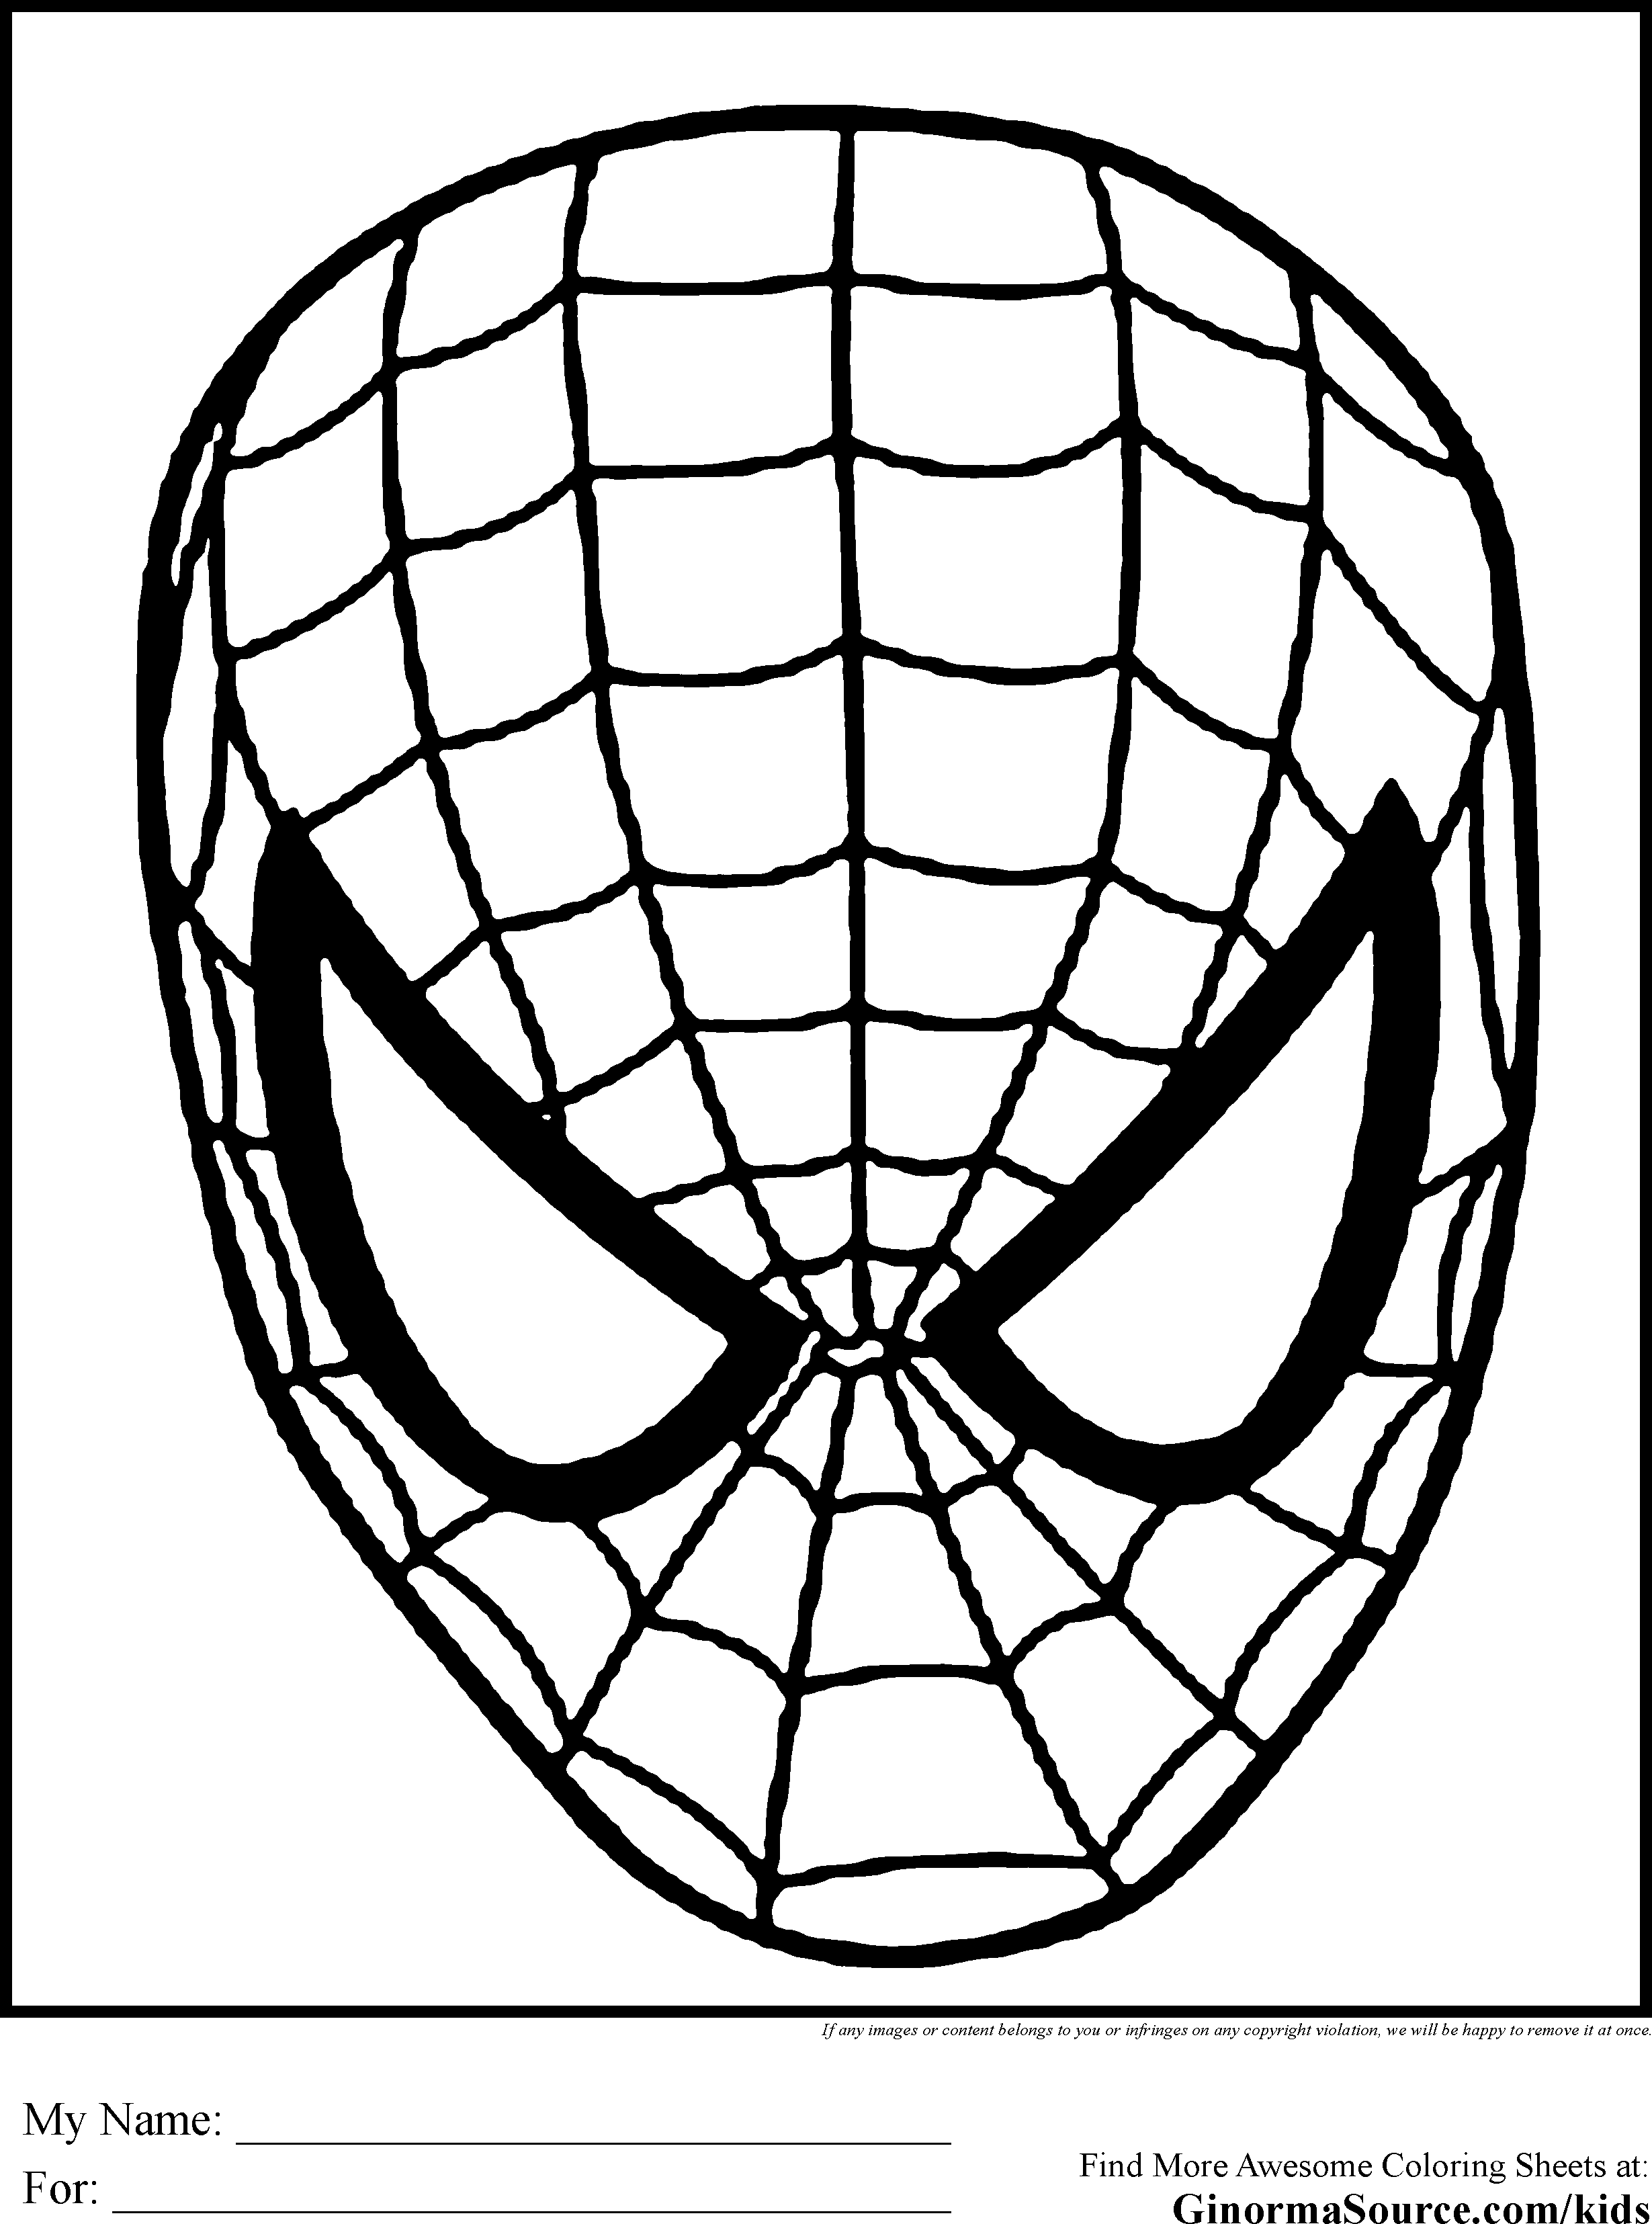 Free Spiderman Face Clipart, Download Free Spiderman Face Clipart png